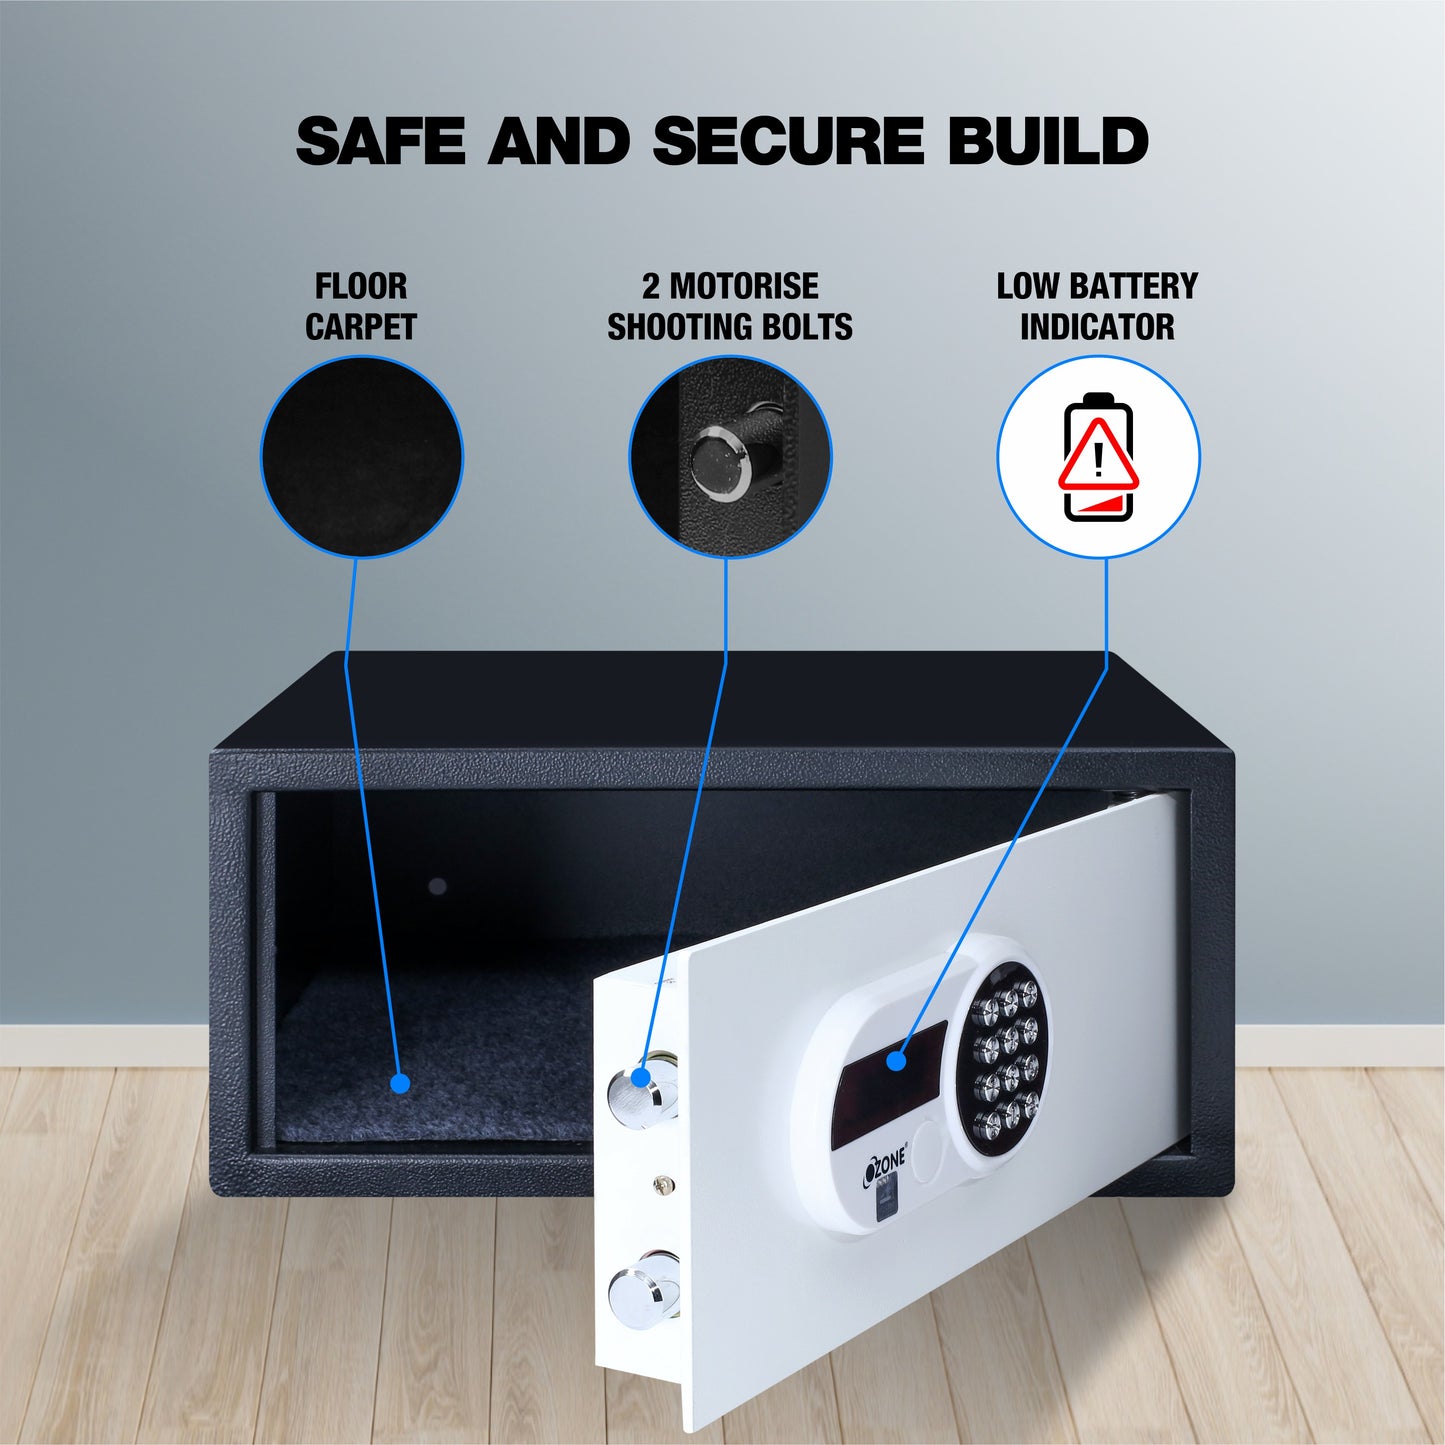 Ozone Laptop Safe for Homes & Hotels | 2-way Access | Password & Emergency Key (26.7 Ltrs.)